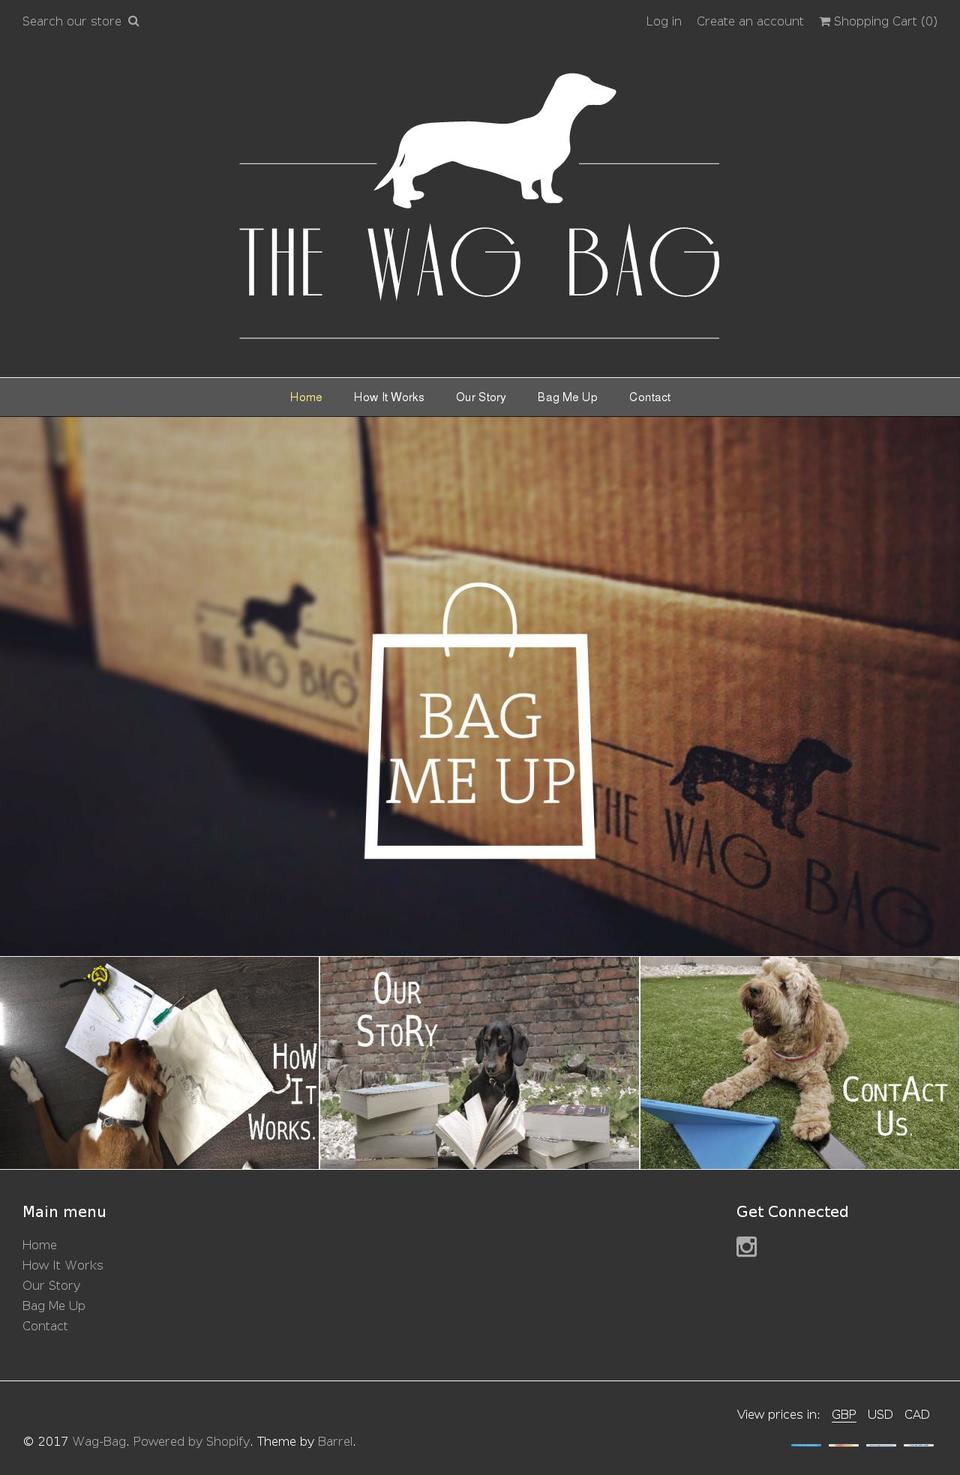 Weekend Shopify theme site example wag-bag.com